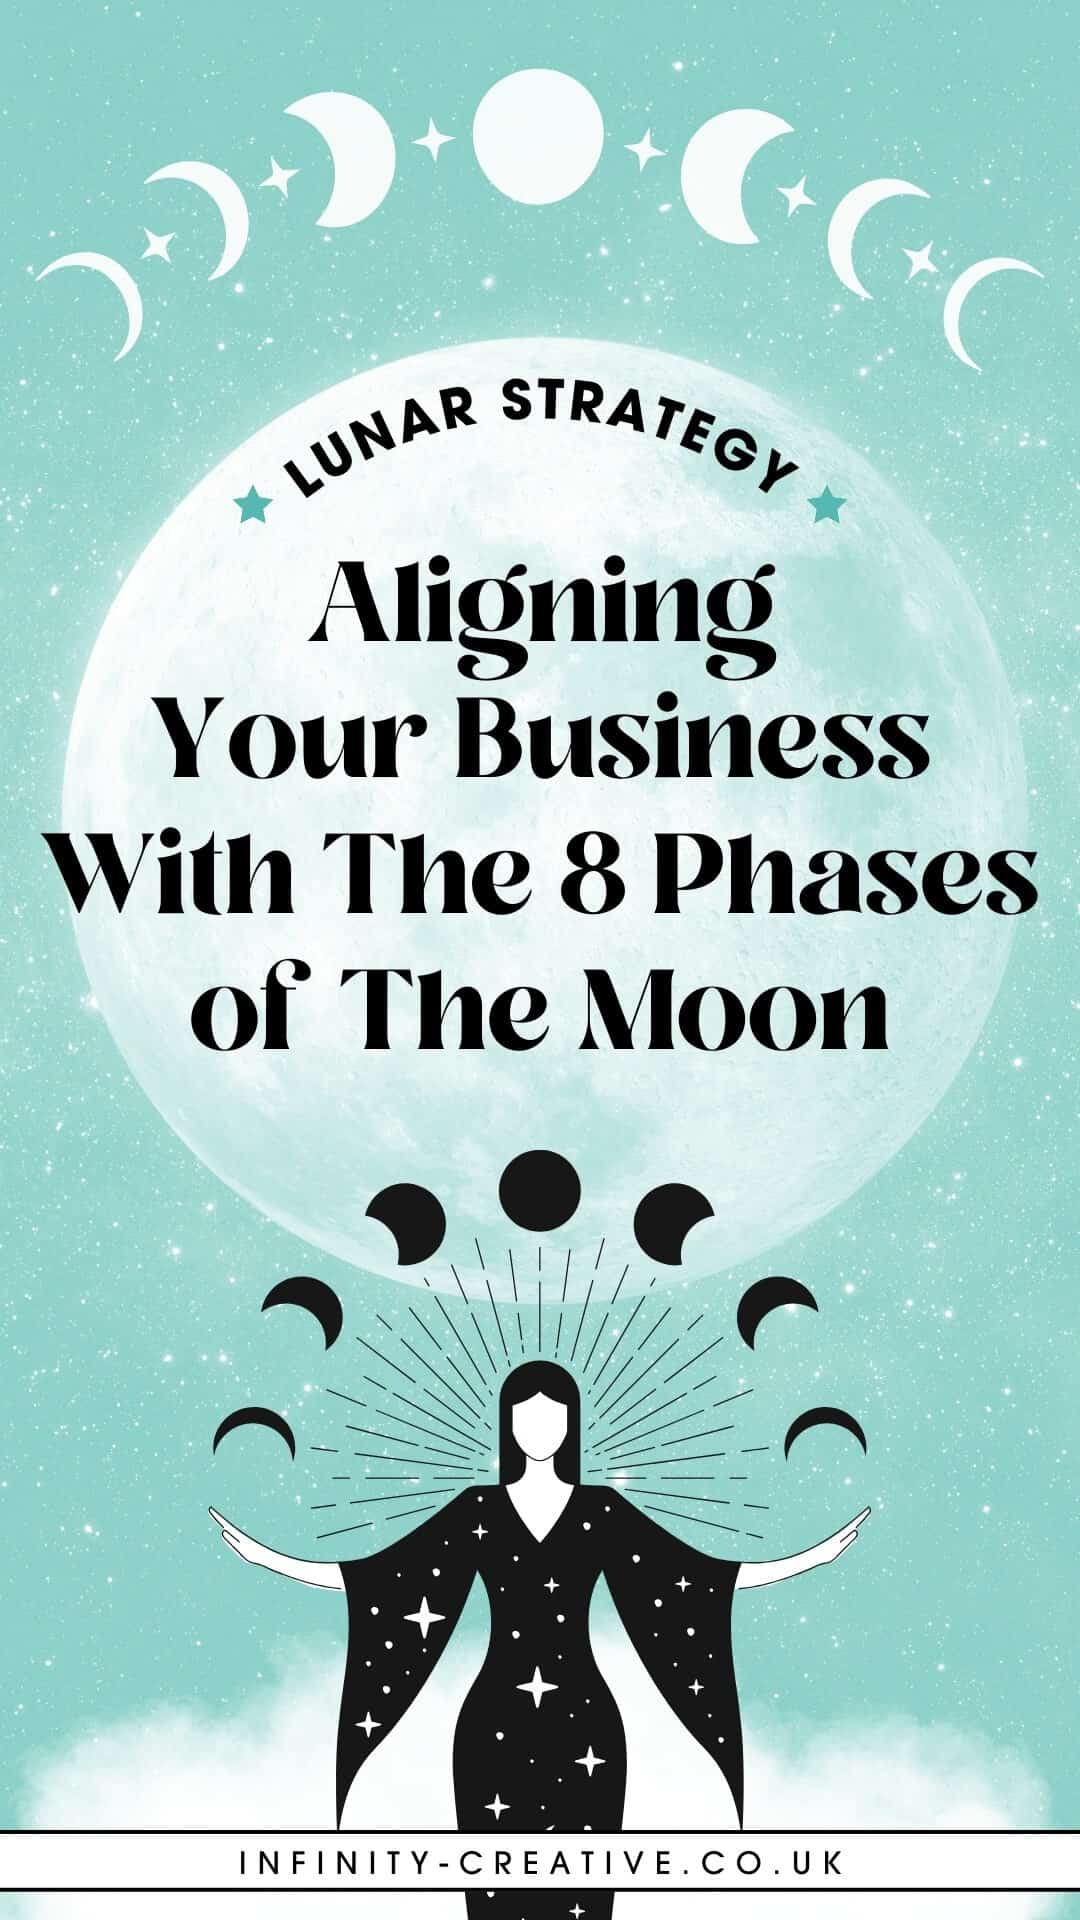 Lunar Strategy Aligning Your Business with the 8 Moon Phases 1 1 1